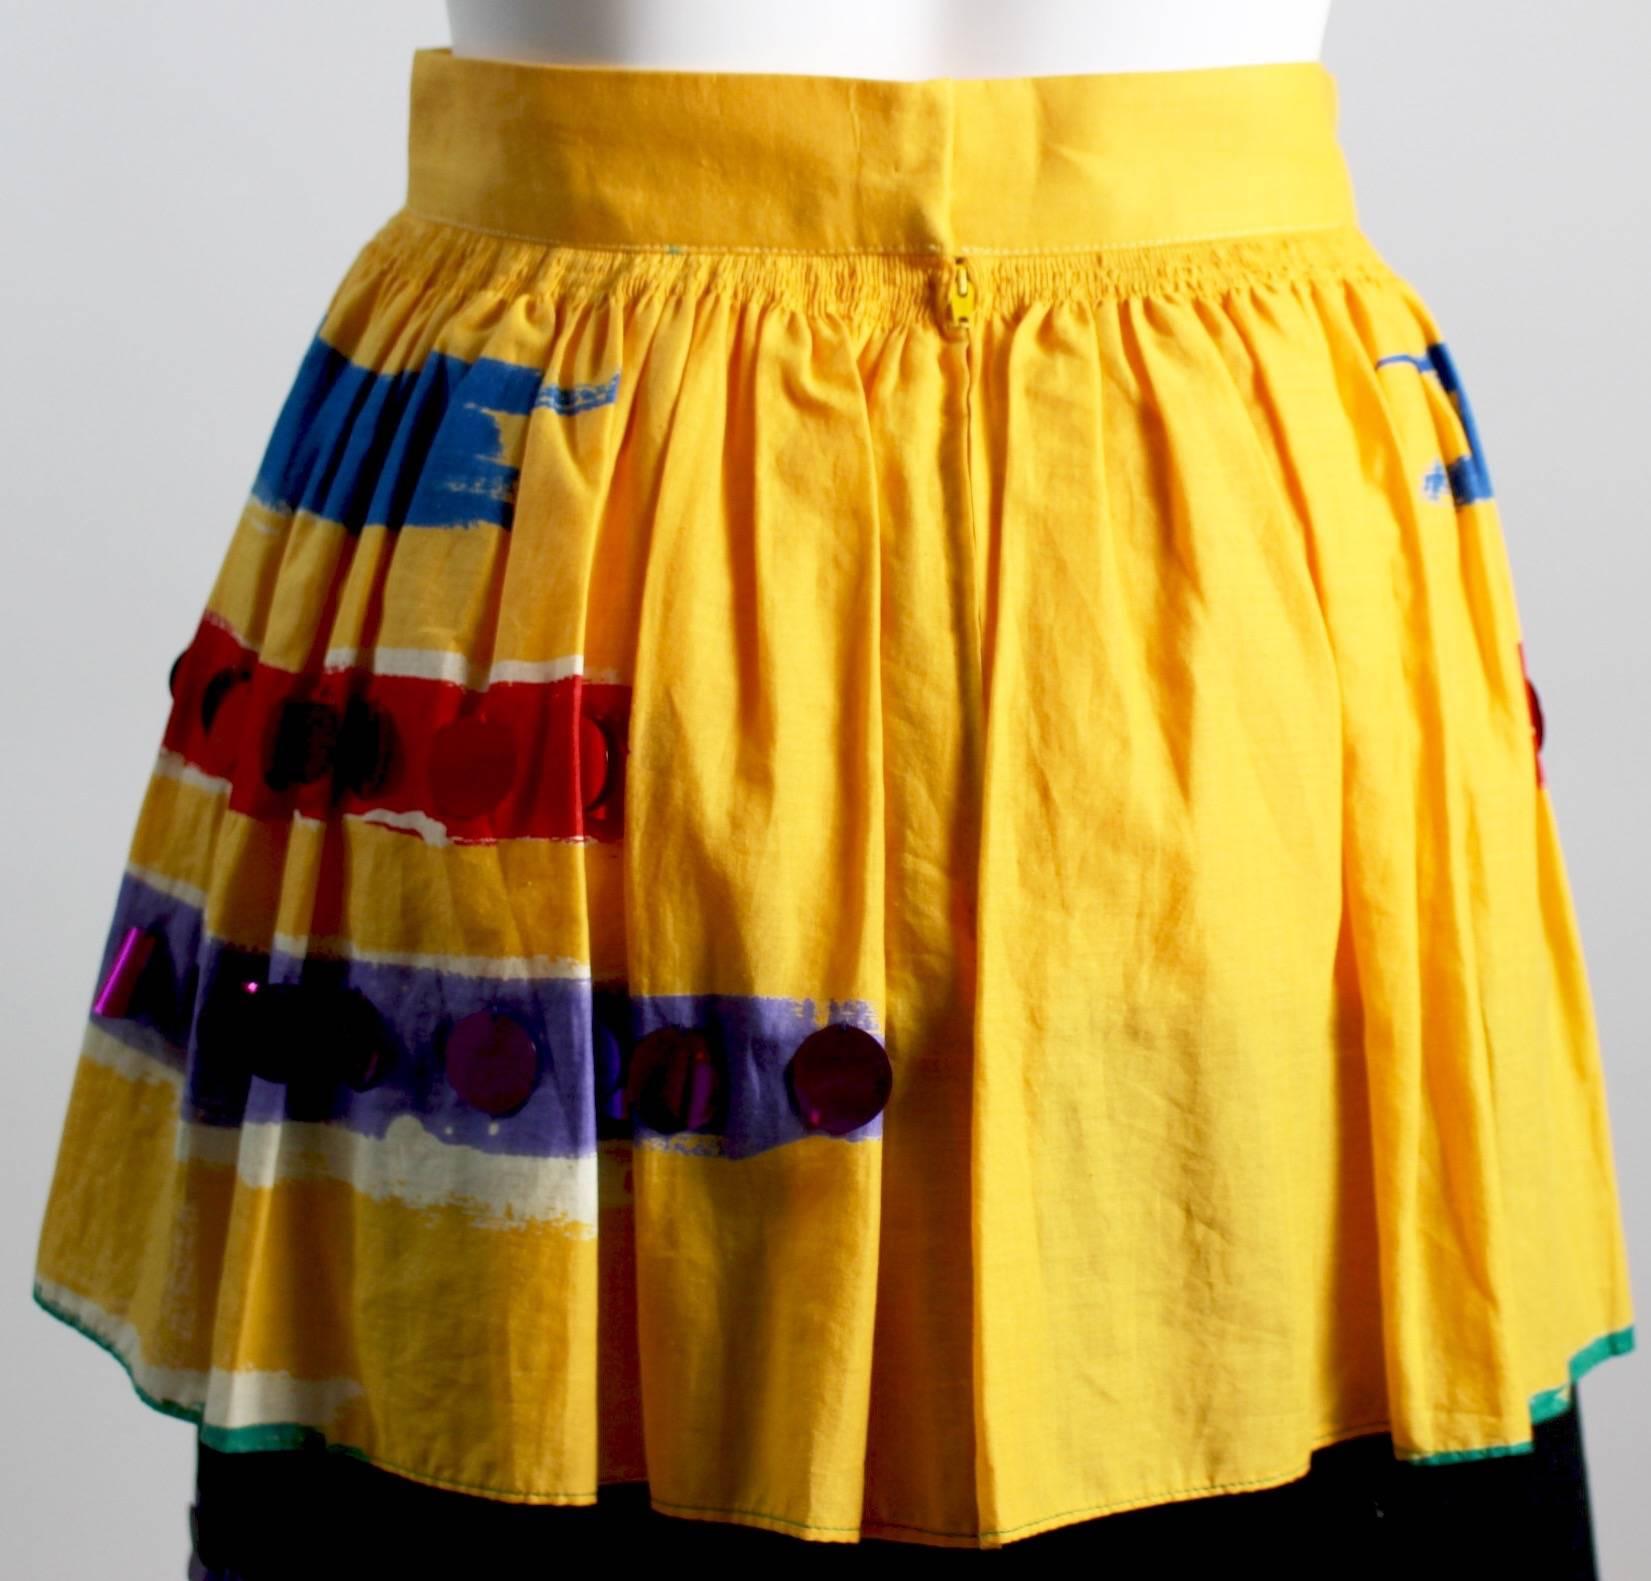  1980s Michaele Vollbrach Colorful Cotton Layered Gypsy Pheasant Skirt  For Sale 2